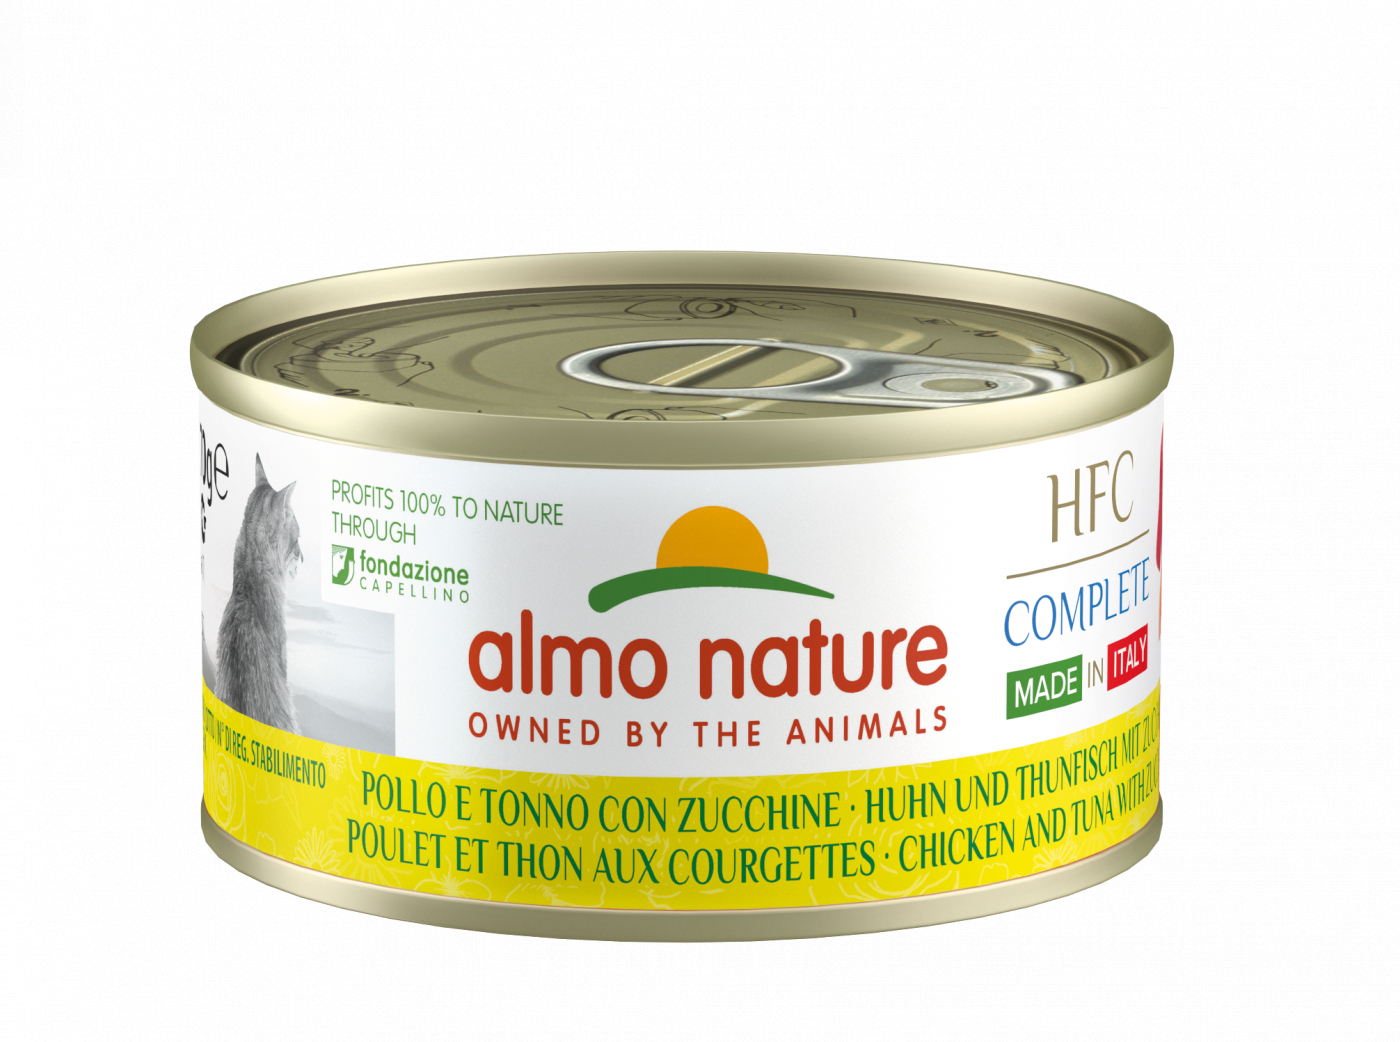 ALMO NATURE HFC Complete Made In Italy Grain Free x70g 